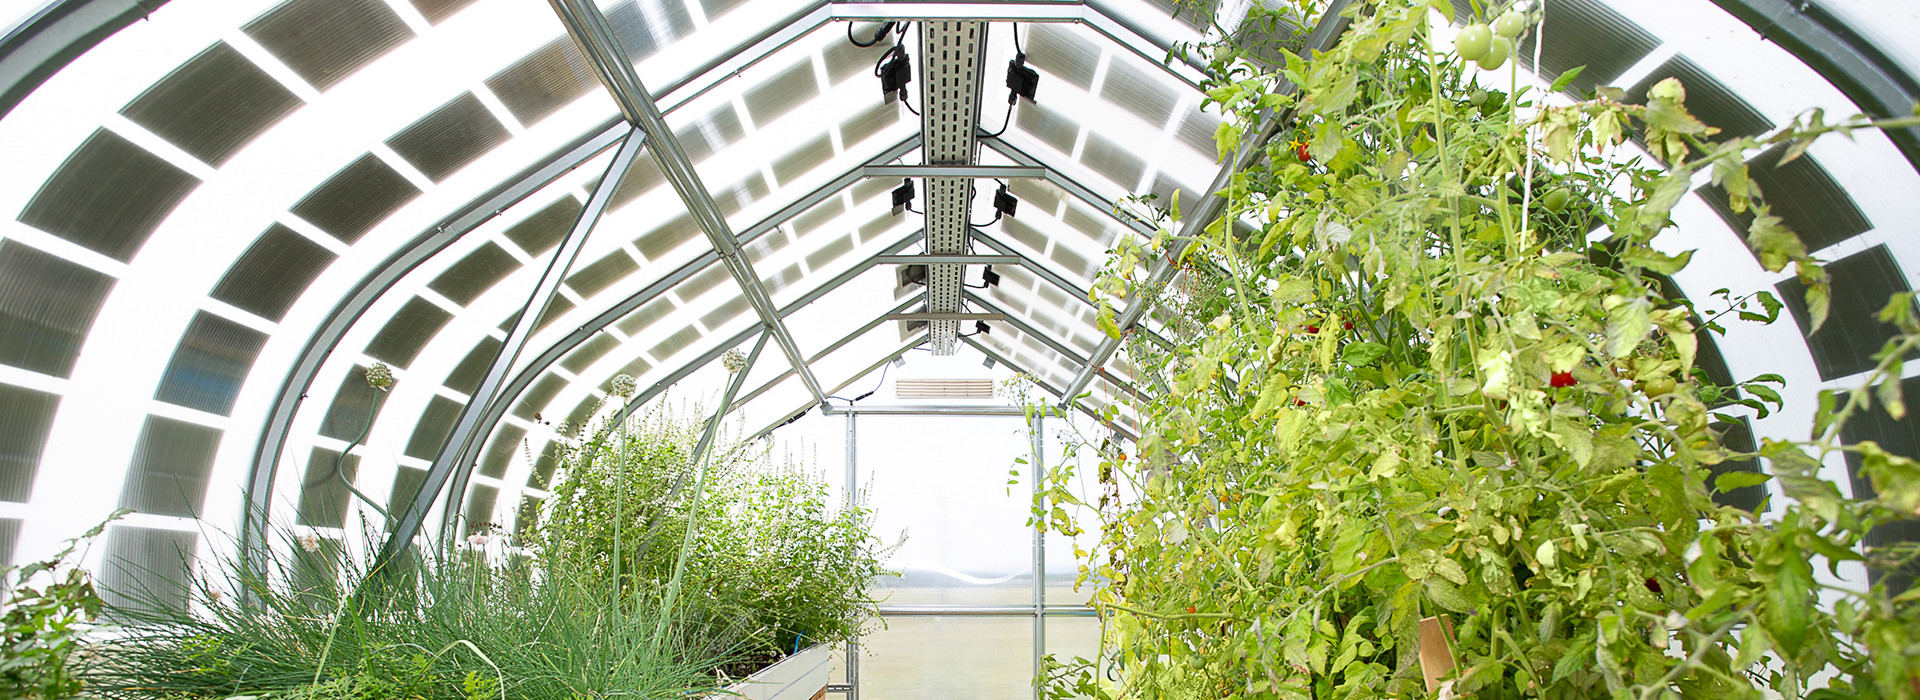 Viennese greenhouses equipped with DAS Energy PV modules